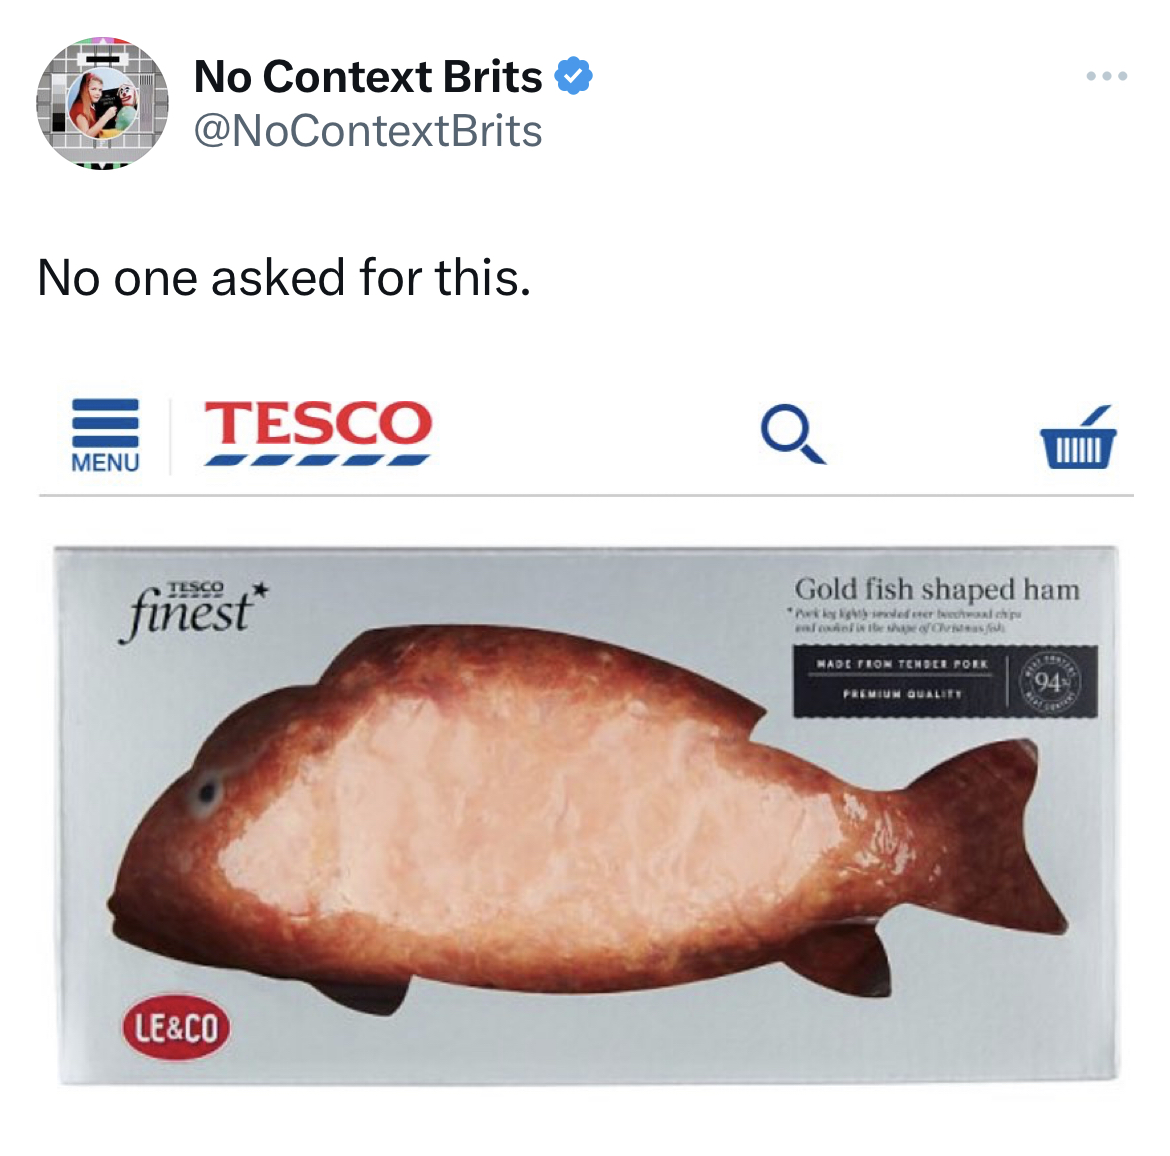 funny tweets - No Context Brits No one asked for this. Menu Tesco finest Le&Co Q Gold fish shaped ham Made From Terbee For Premium Quality 94 www